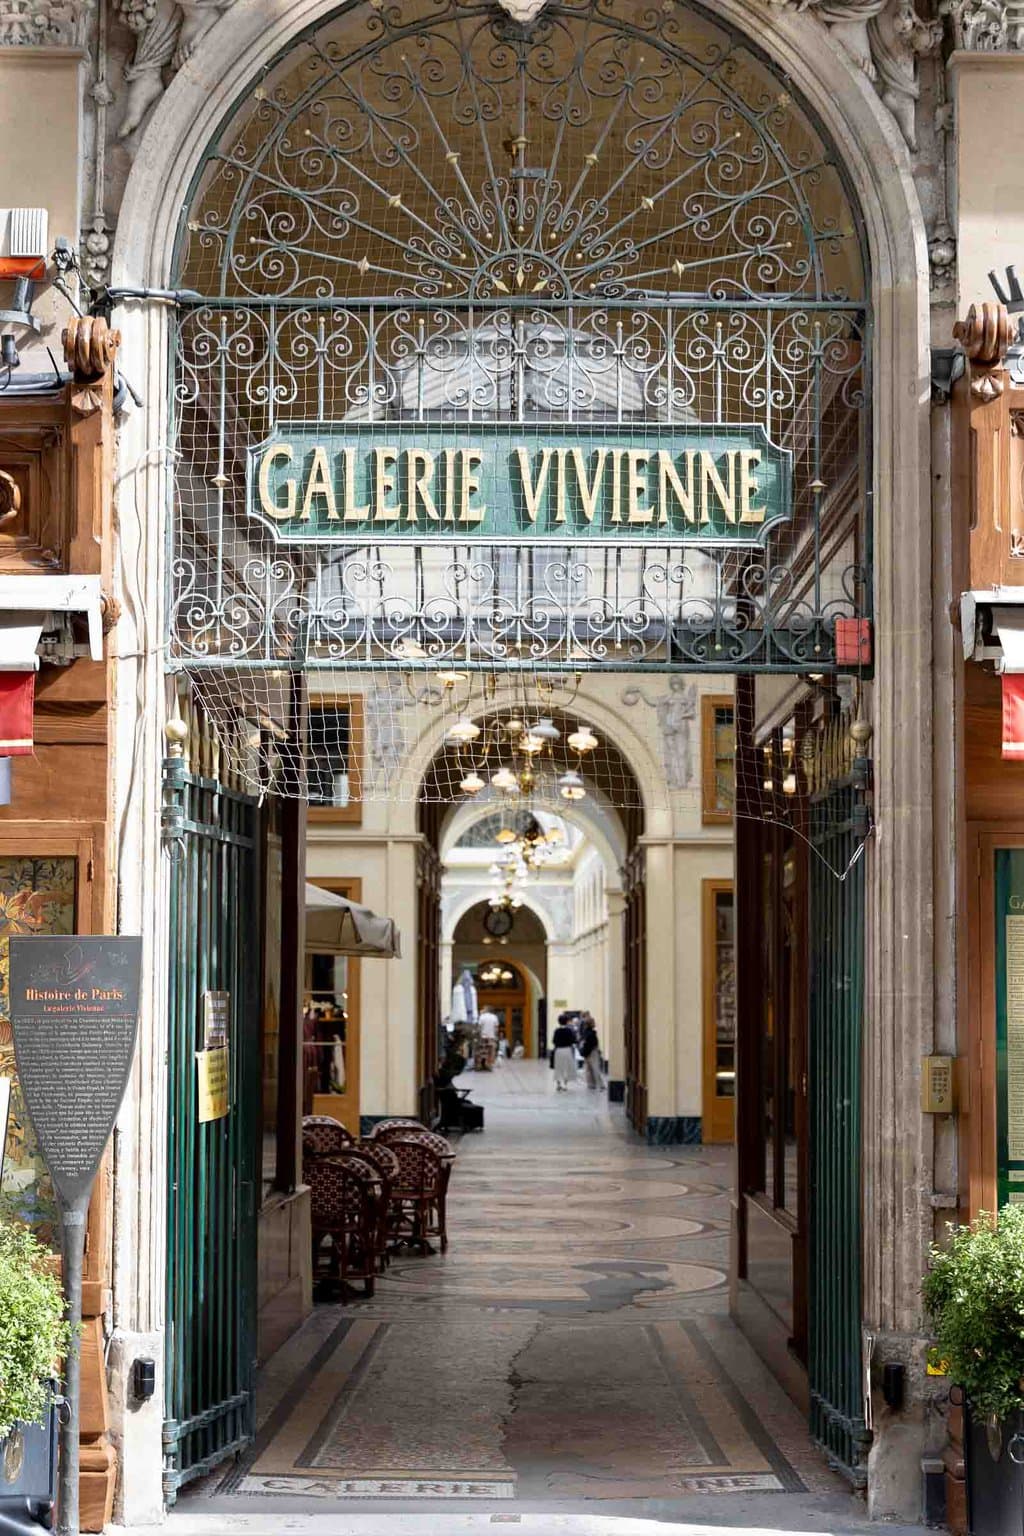 Vertical photo of Galerie Vivienne, one of the upscale gallery shopping/dining areas in Paris.